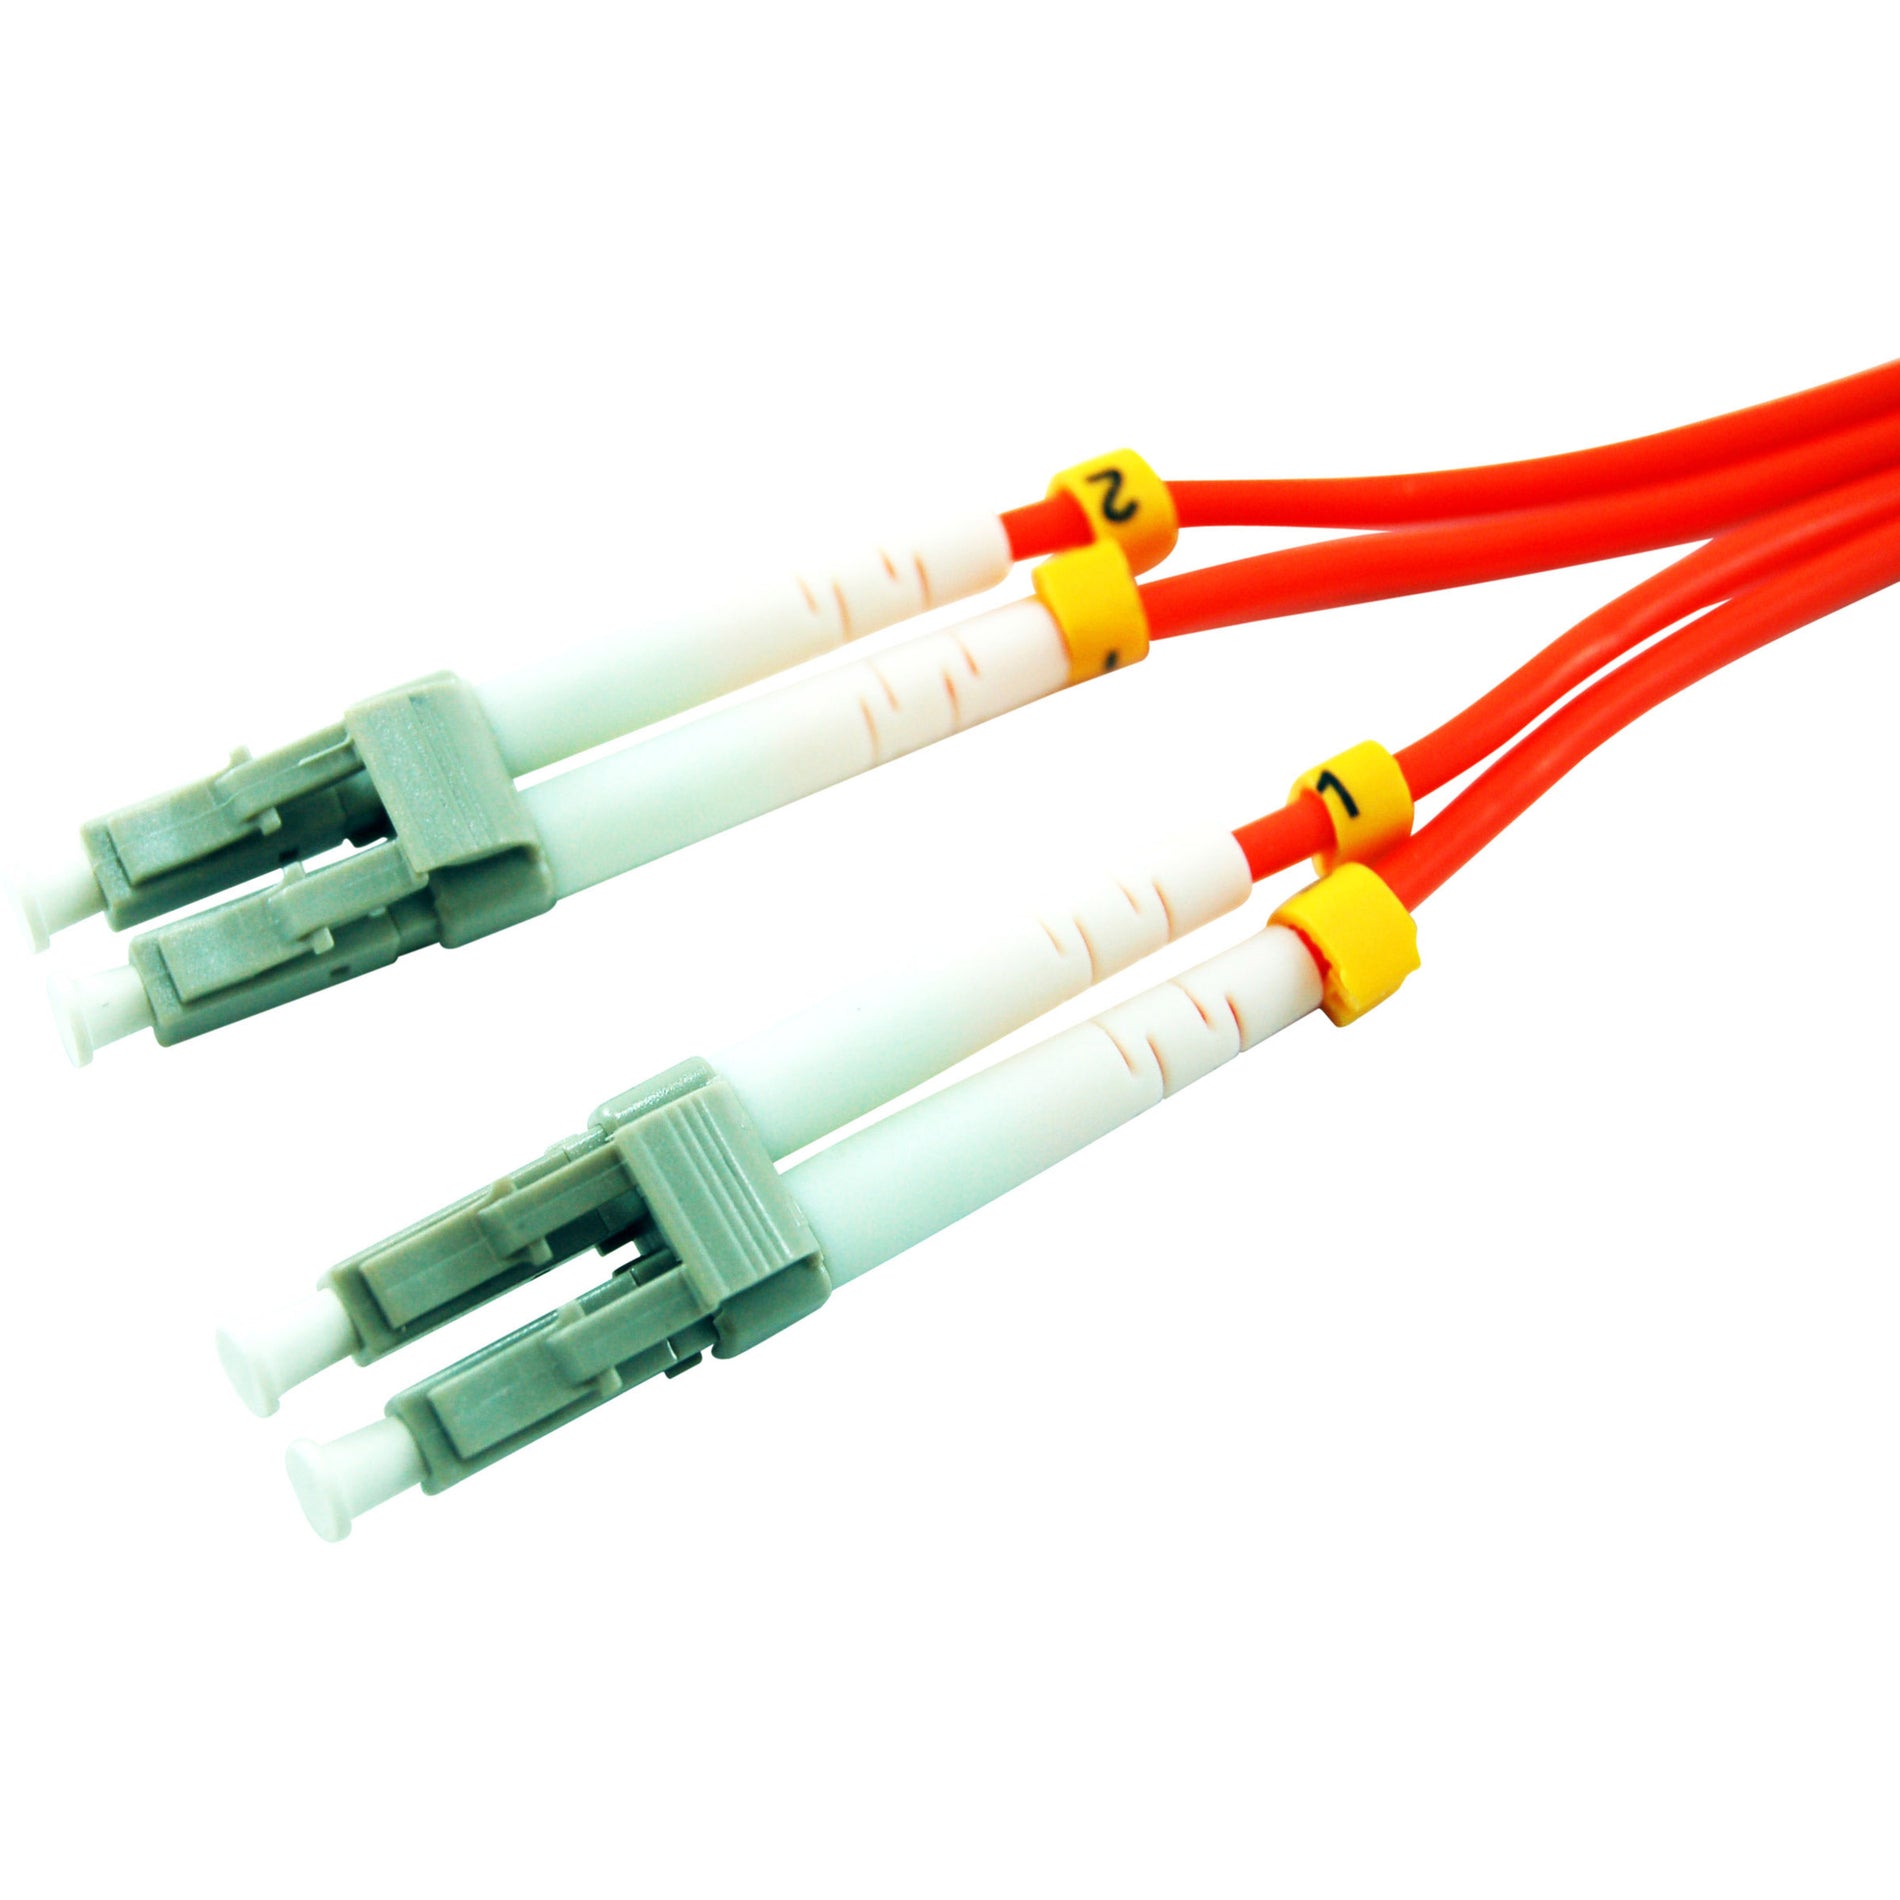 Comprehensive LC-LC-MM-15M 15M LC Multimode 3.0mm Duplex Network Cable, Riser Rated, 1 Gbit/s Data Transfer Rate